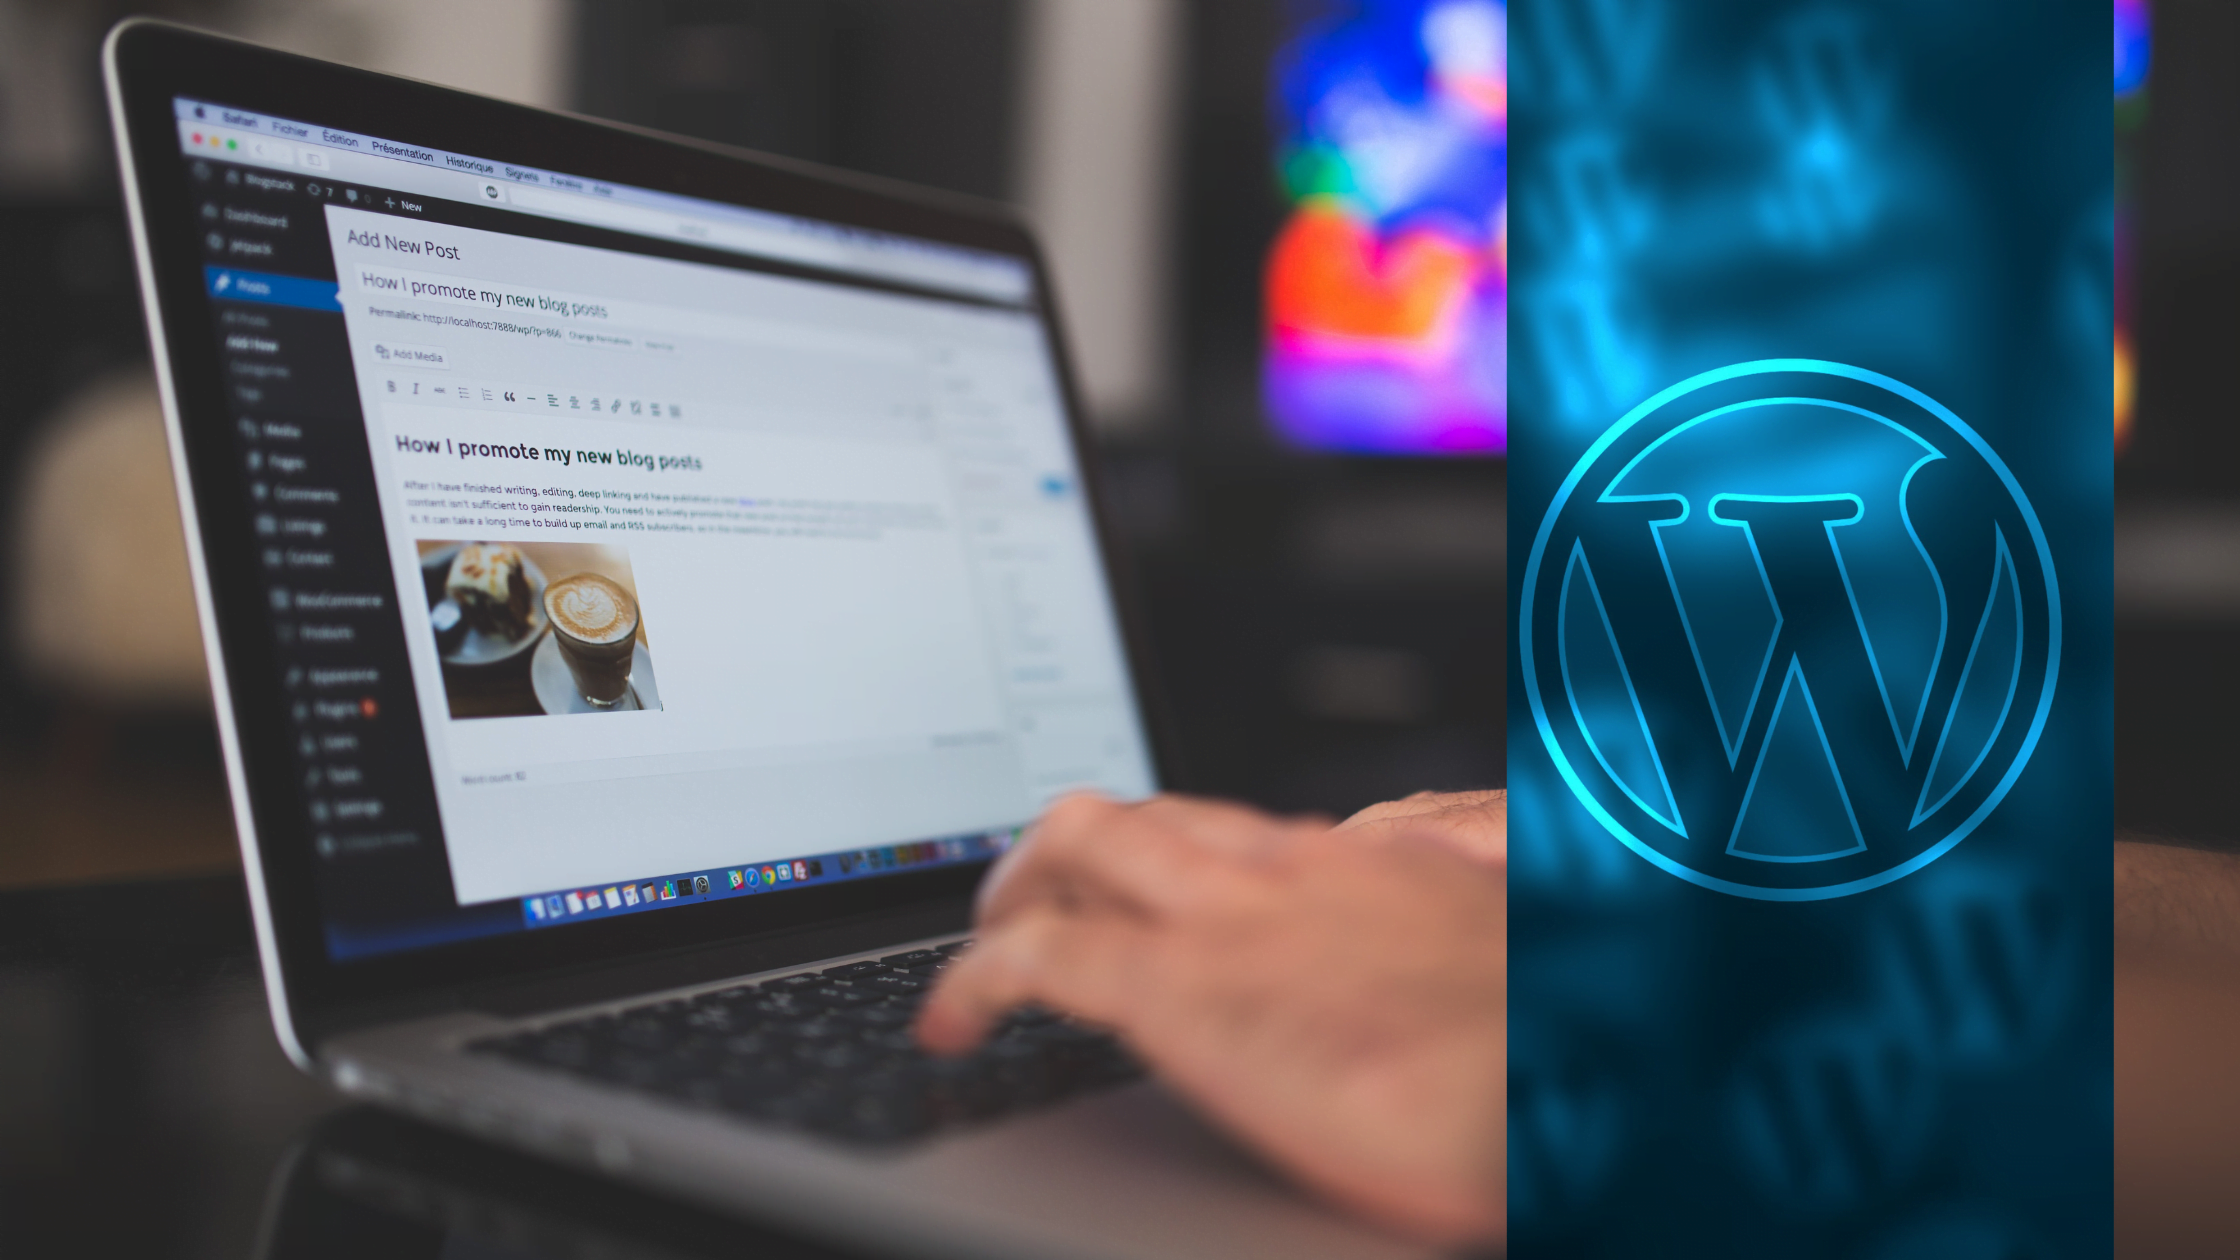 Let our team setup your WordPress blog for you